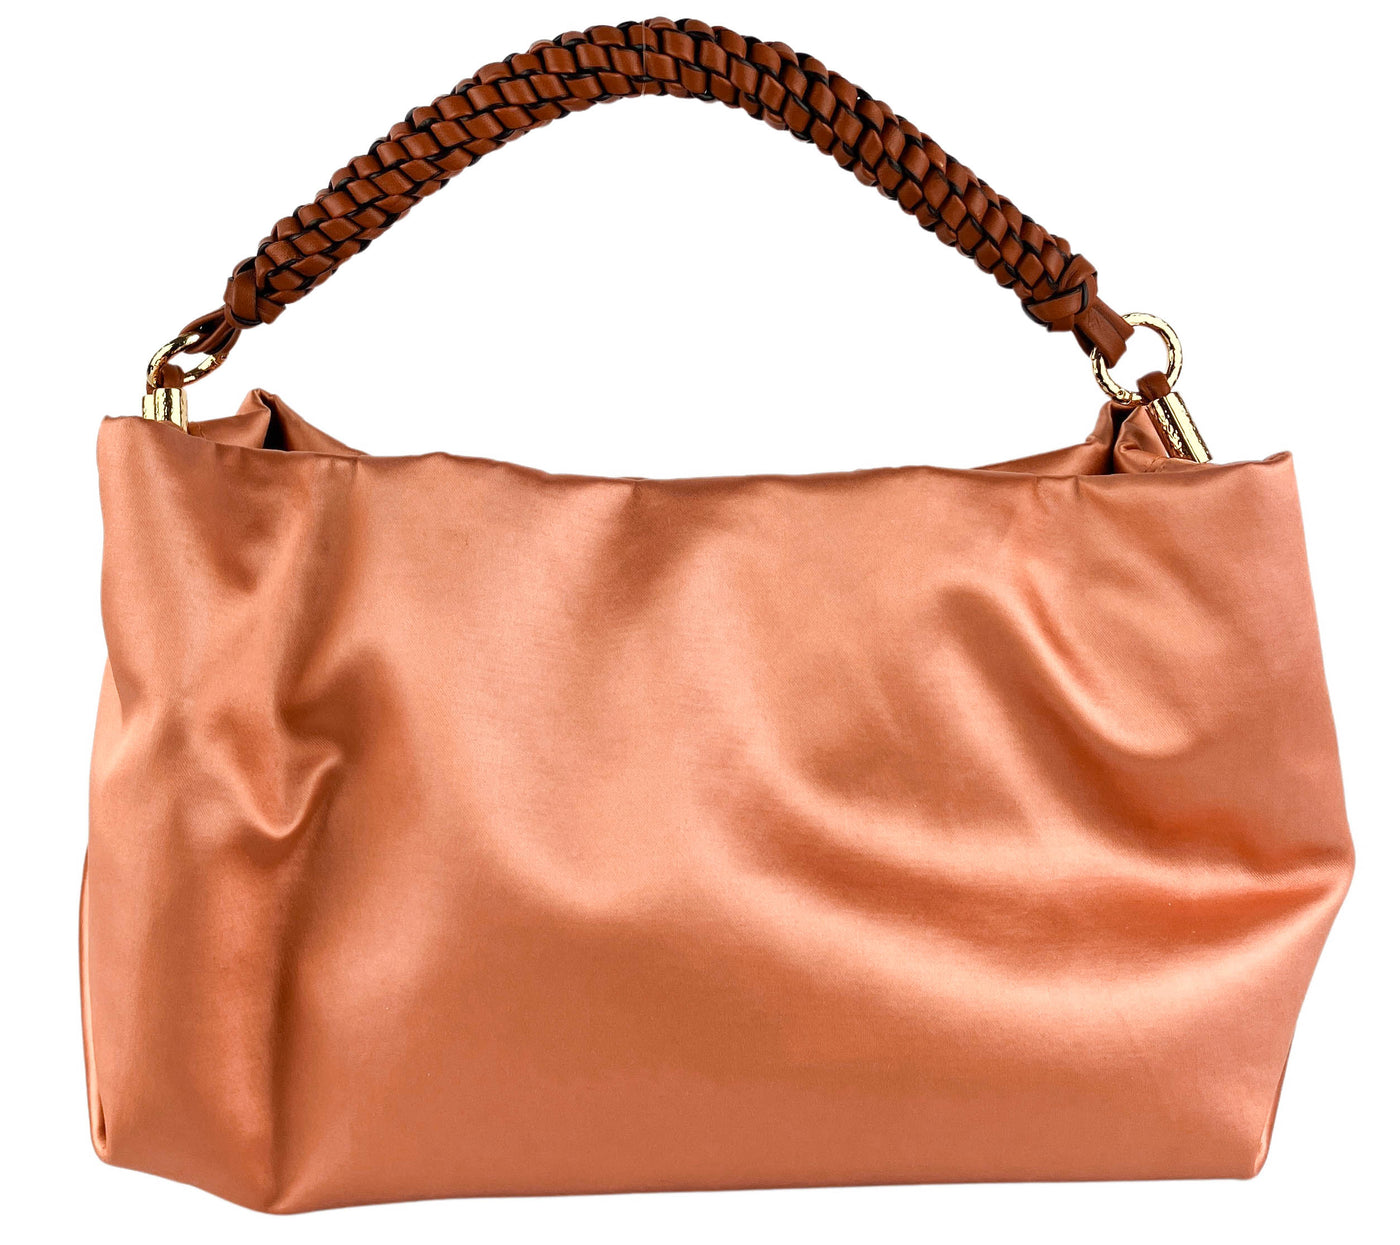 Ulla Johnson Remy Soft Convertible Clutch in Copper - Discounts on Ulla Johnson at UAL